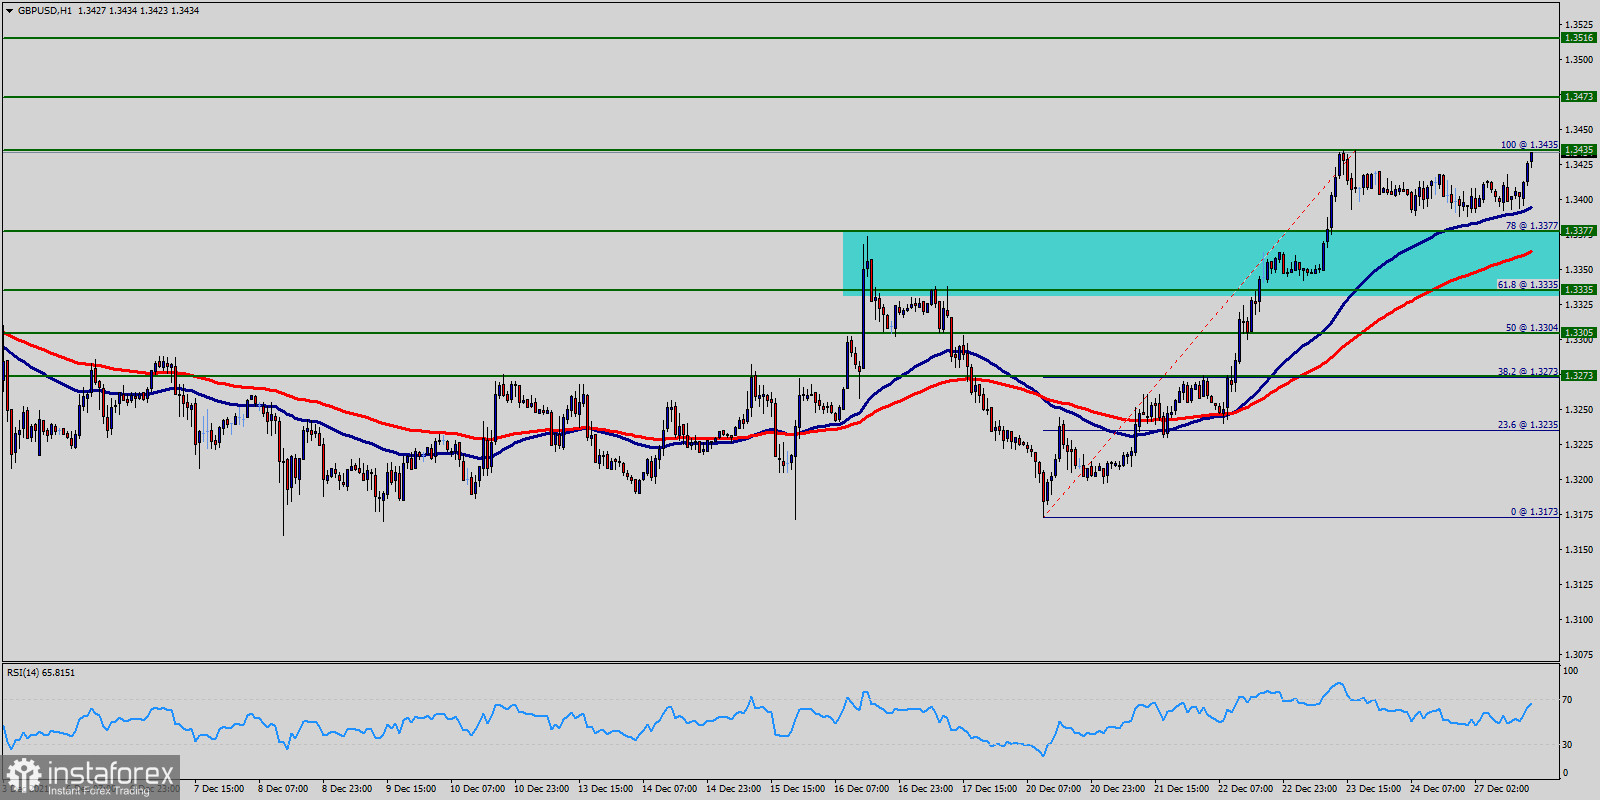 Technical analysis of GBP/USD for December 27, 2021